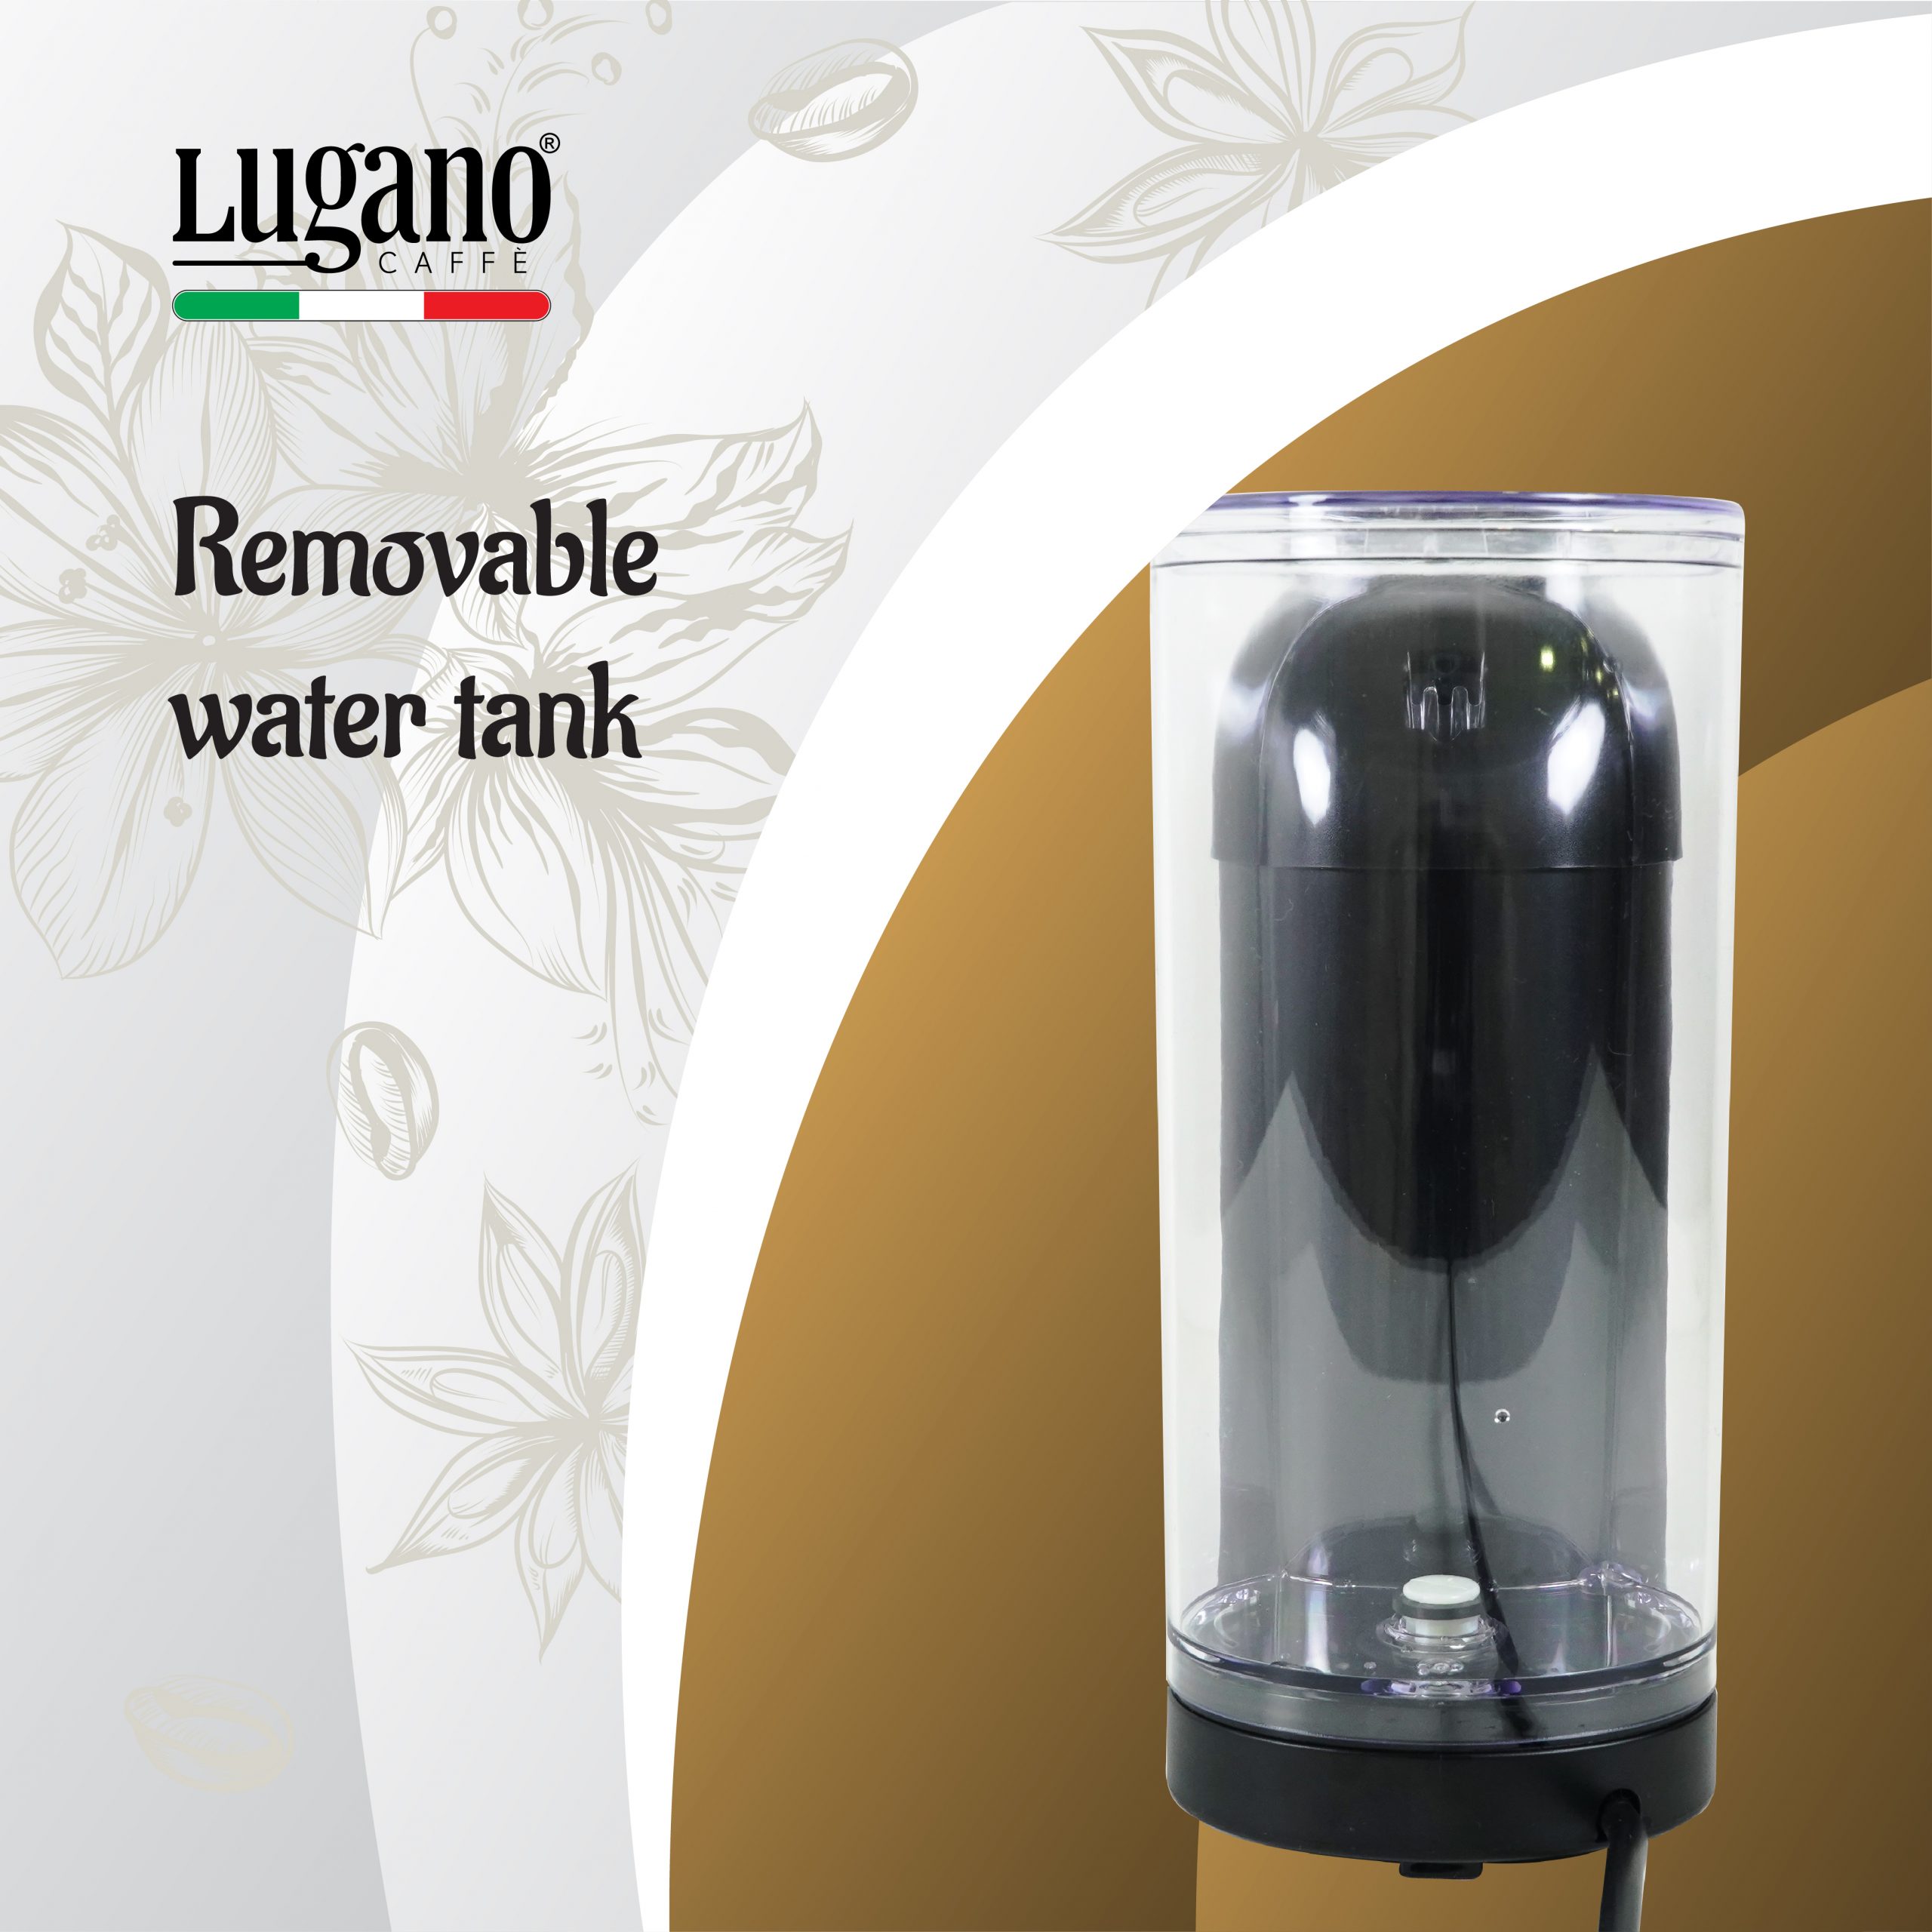 Lugnao Removable Water Tank